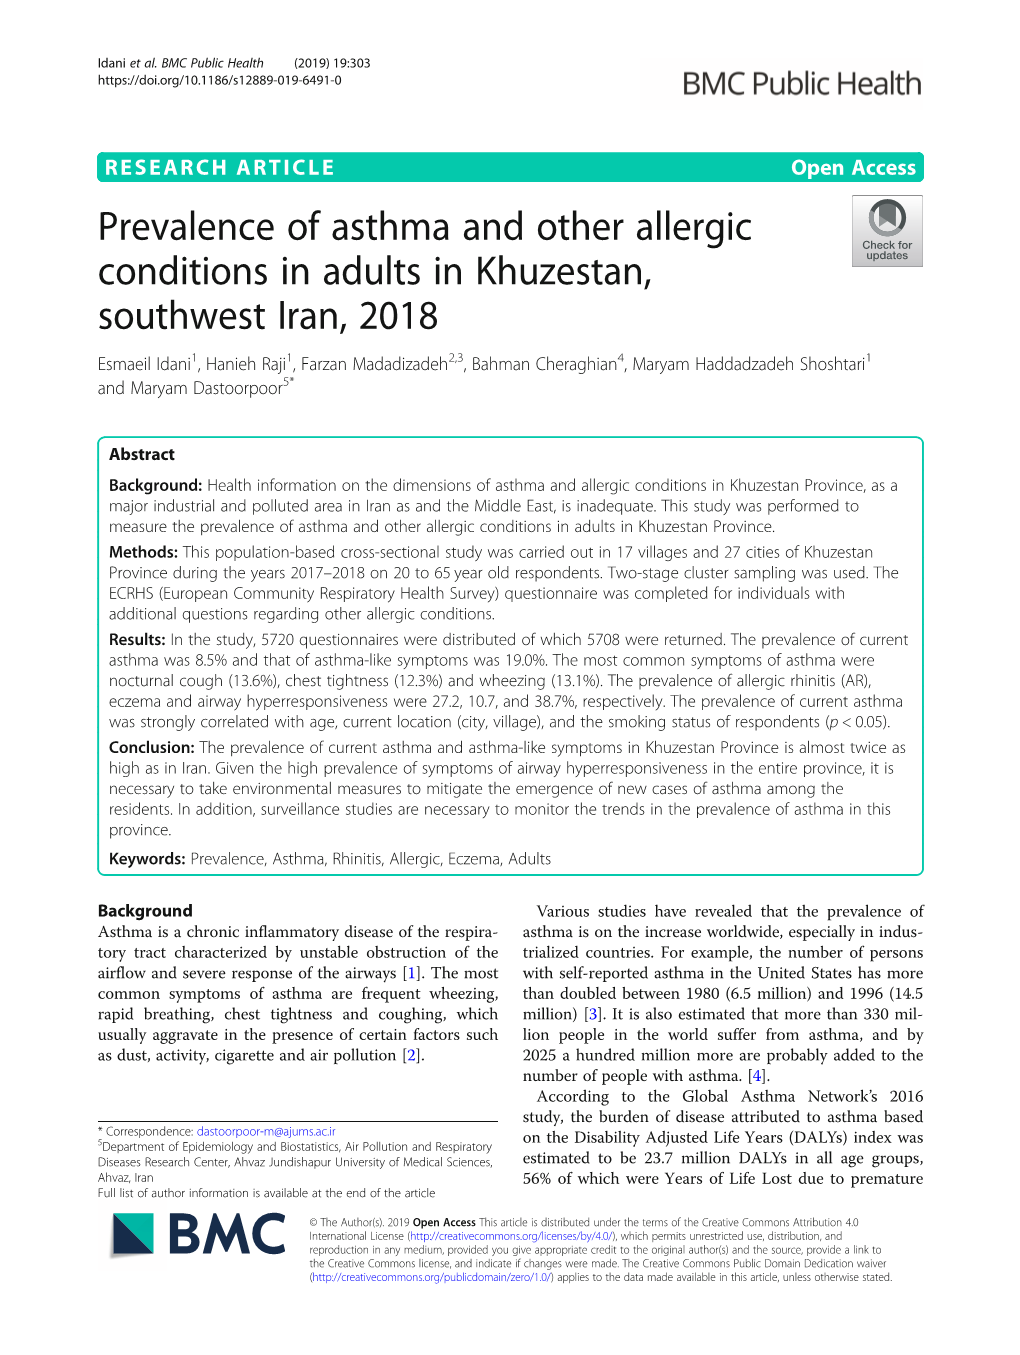 Prevalence of Asthma and Other Allergic Conditions in Adults In